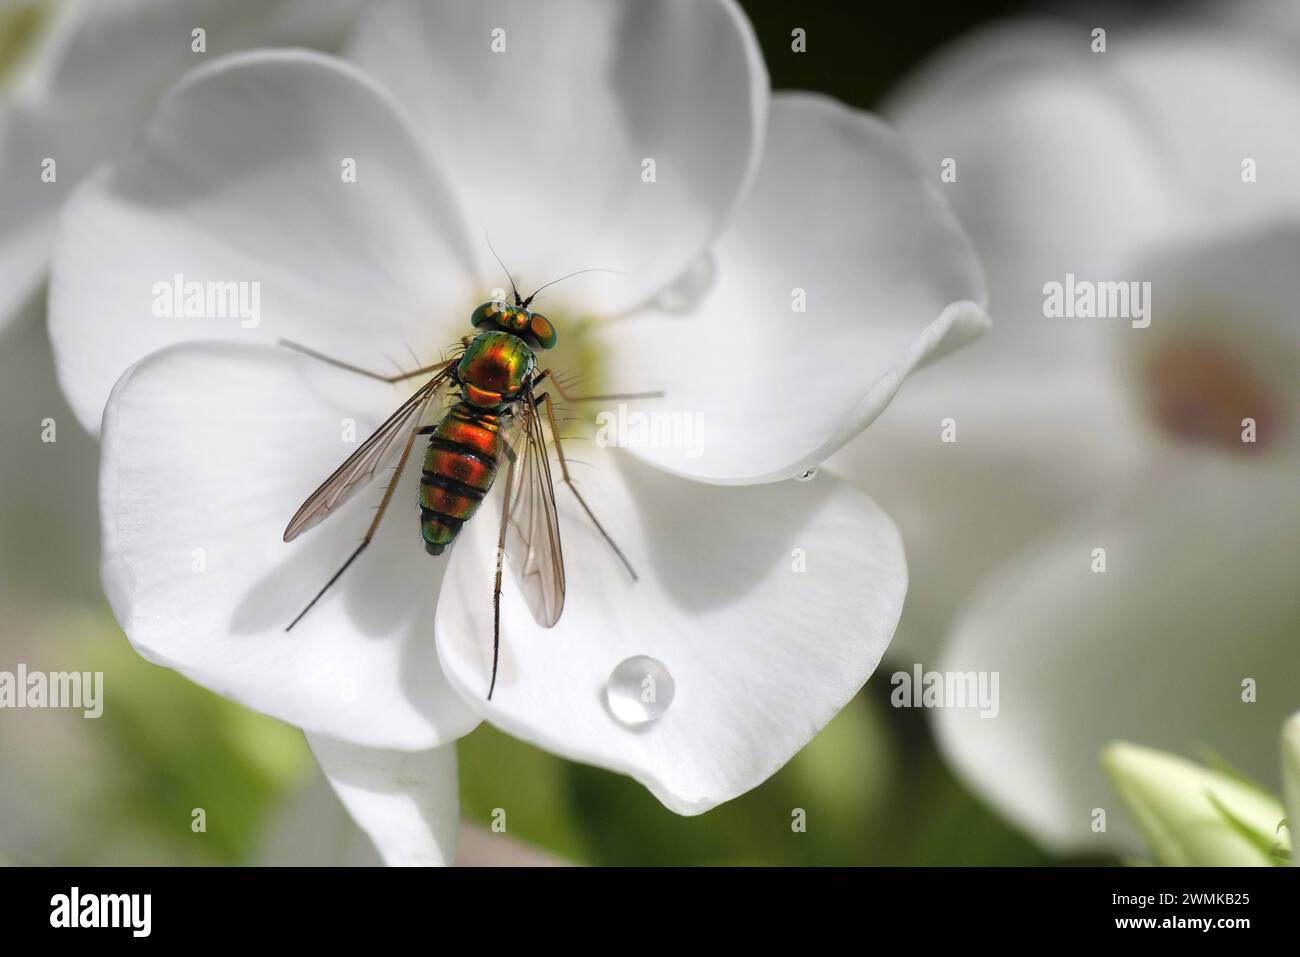 Iridescent fly rests on a white phlox blossom next to a drop of water; Weaverville, North Carolina, United States of America Stock Photo